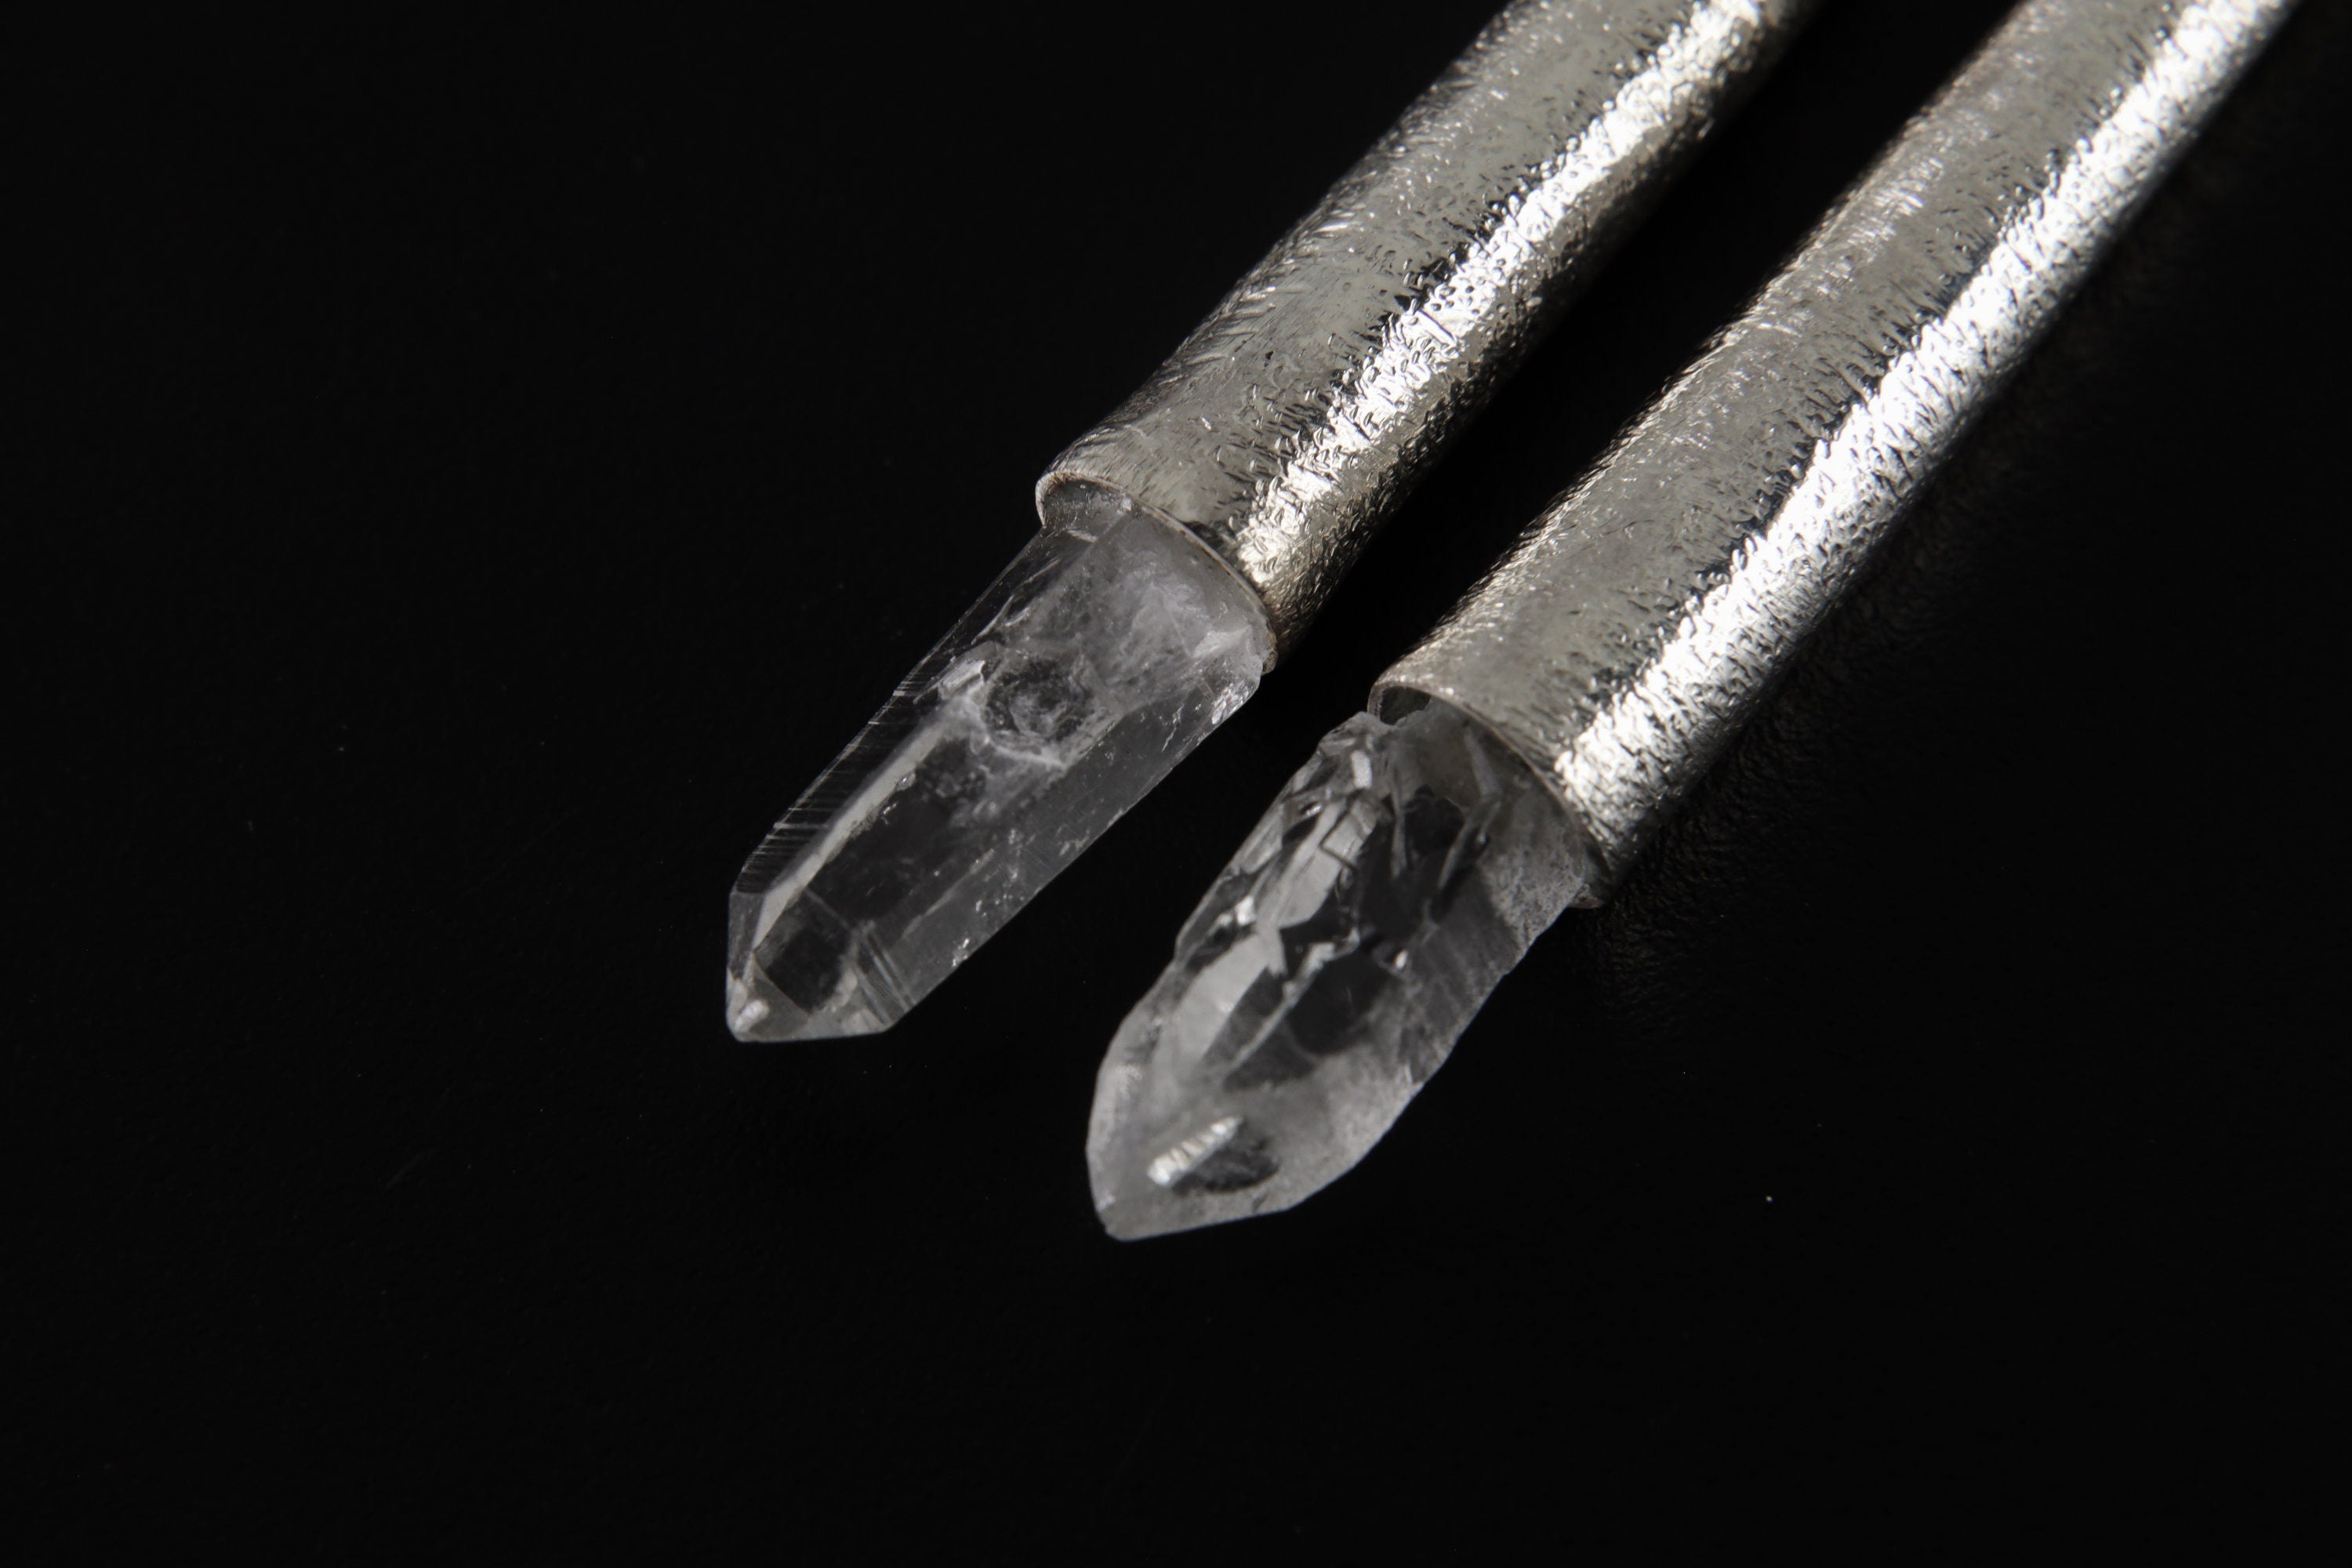 Sterling Silver Earrings with Lemurian Quartz Point Silver Spire Cones - High Shine Polish Sand Textured Finish - Enhances Energy & Healing